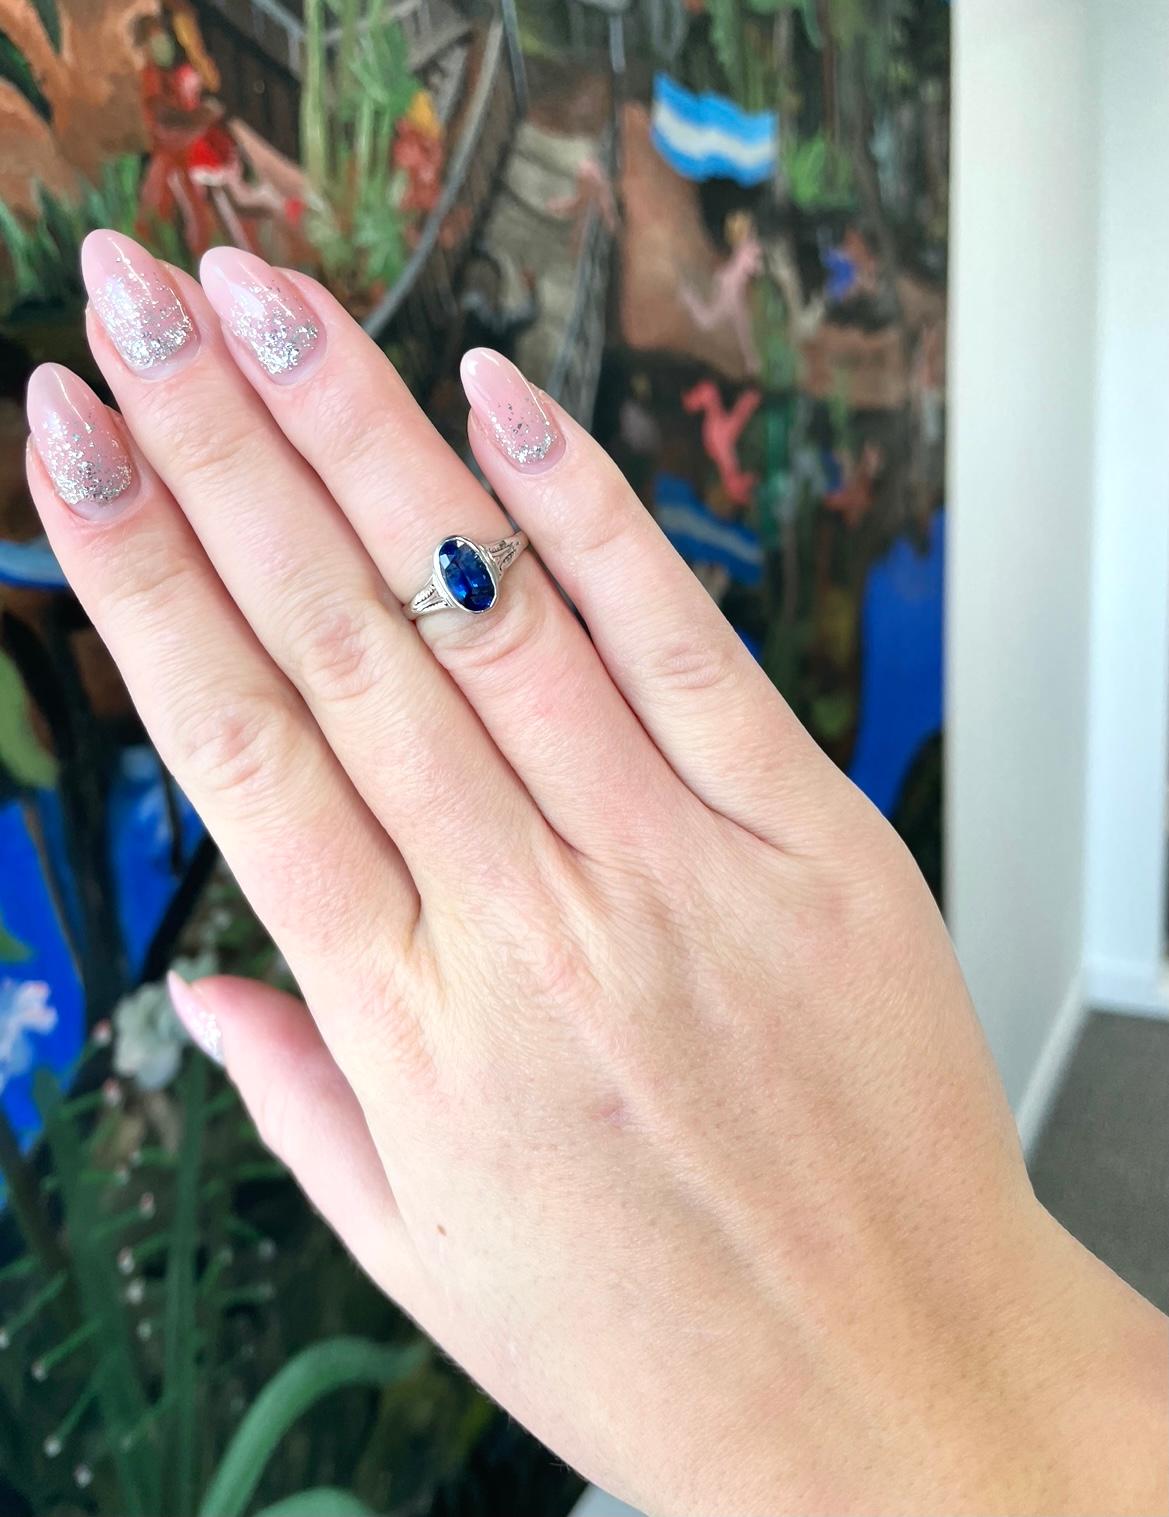 Antique, colorful and elegant. What else can you wish for? This is a gorgeous Edwardian sapphire ring. Wear a piece of antique 100 year old history on your finger. GIA certified as Ceylon sapphire, heated (#2211358645). Approximately 1.55 carats.